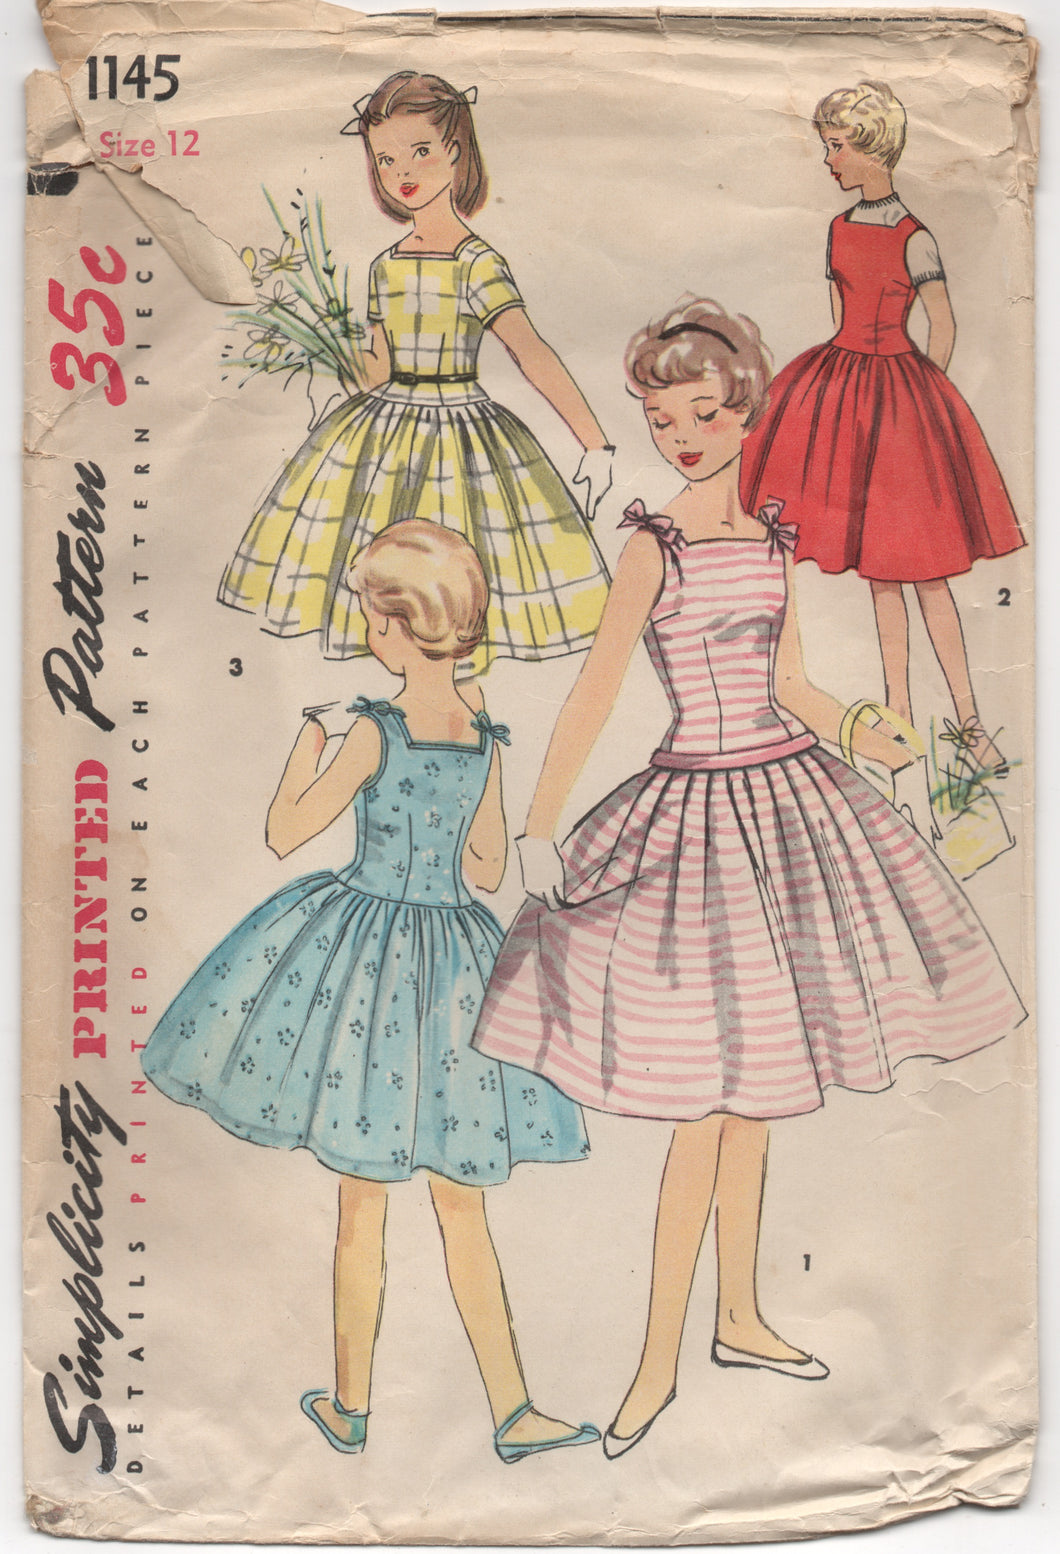 1950’s Simplicity Girl’s One Piece Dress with Drop waist and Bow detail - Bust 30” - No. 1145